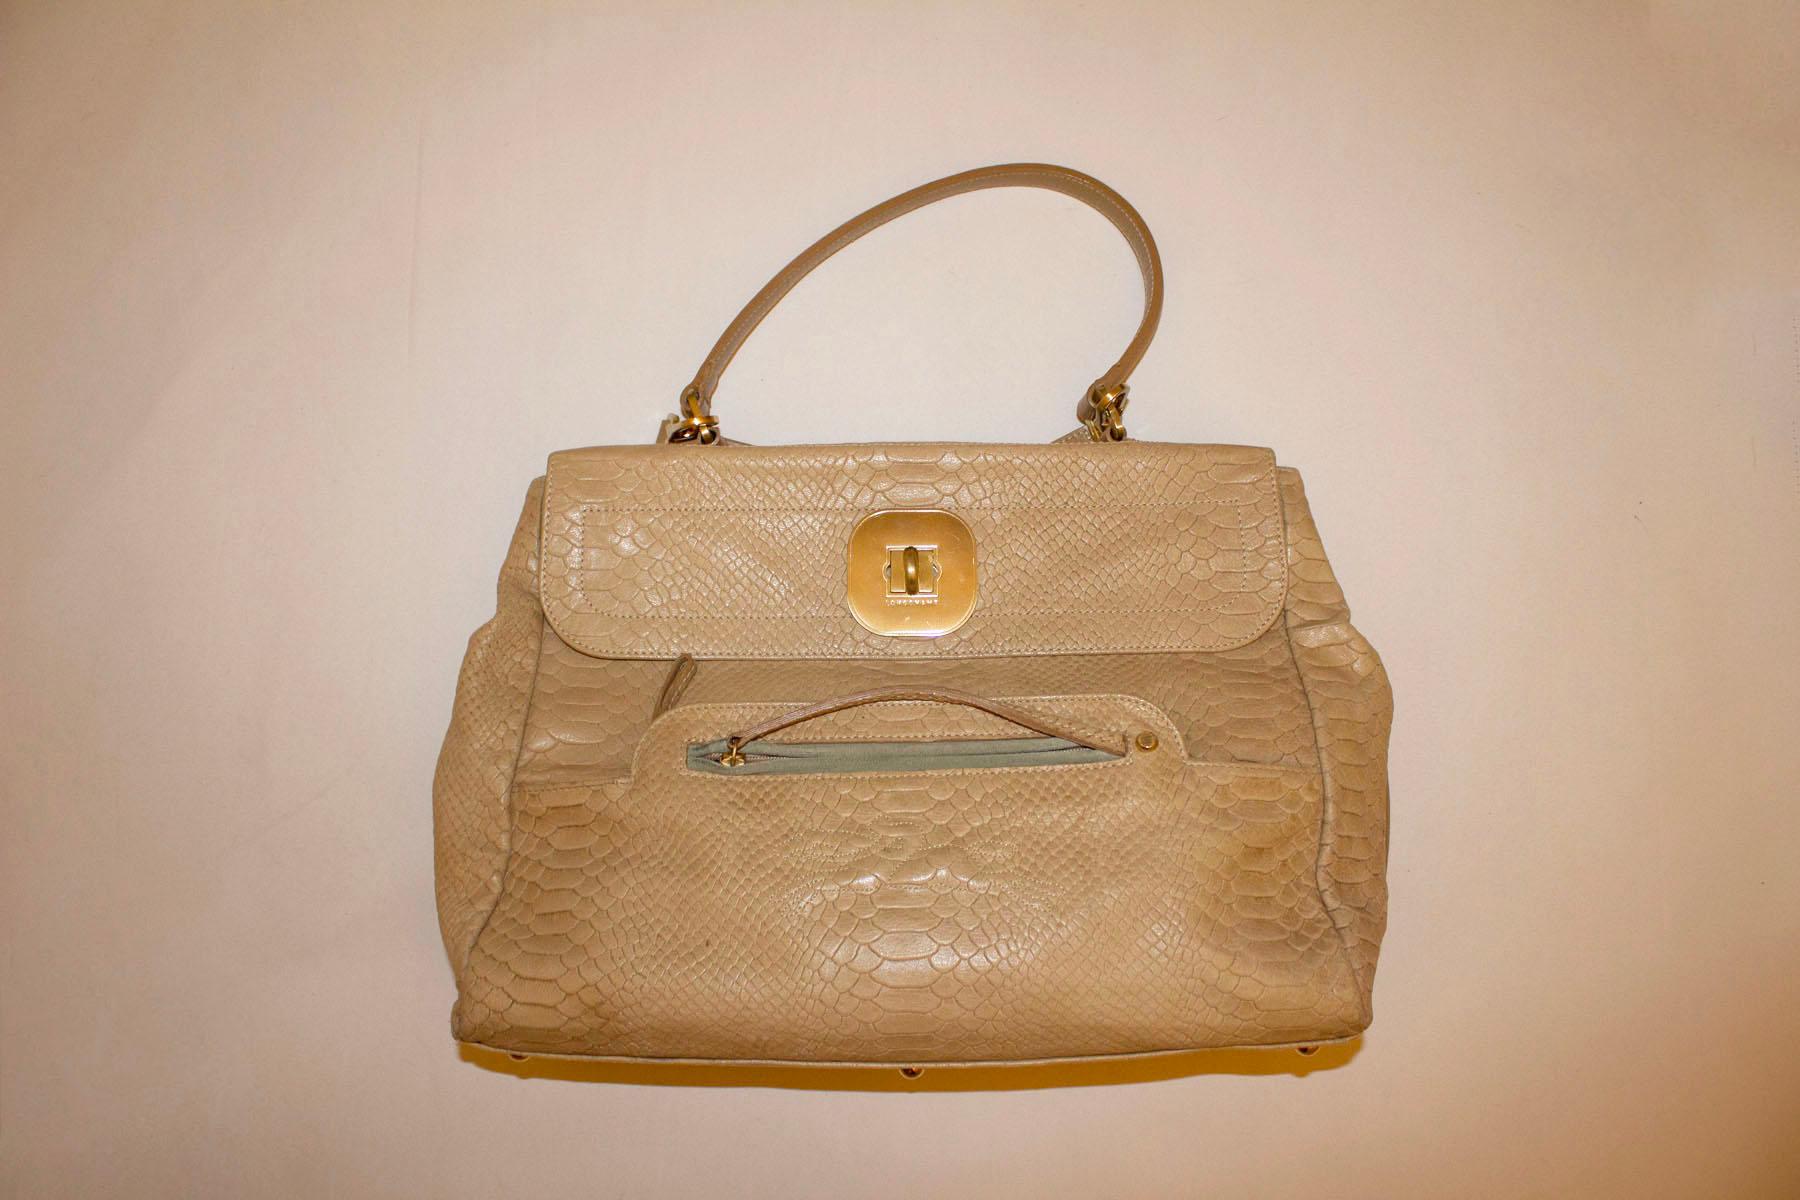 A wonderful caramel colour leather bag by Longchamp. The bag is top handle, with a detachable shoulder strap.
It has a flap front opening, with an external zip pocket. Internally there is one zip pocket and two pouch pockets.
The bag has stud feet,